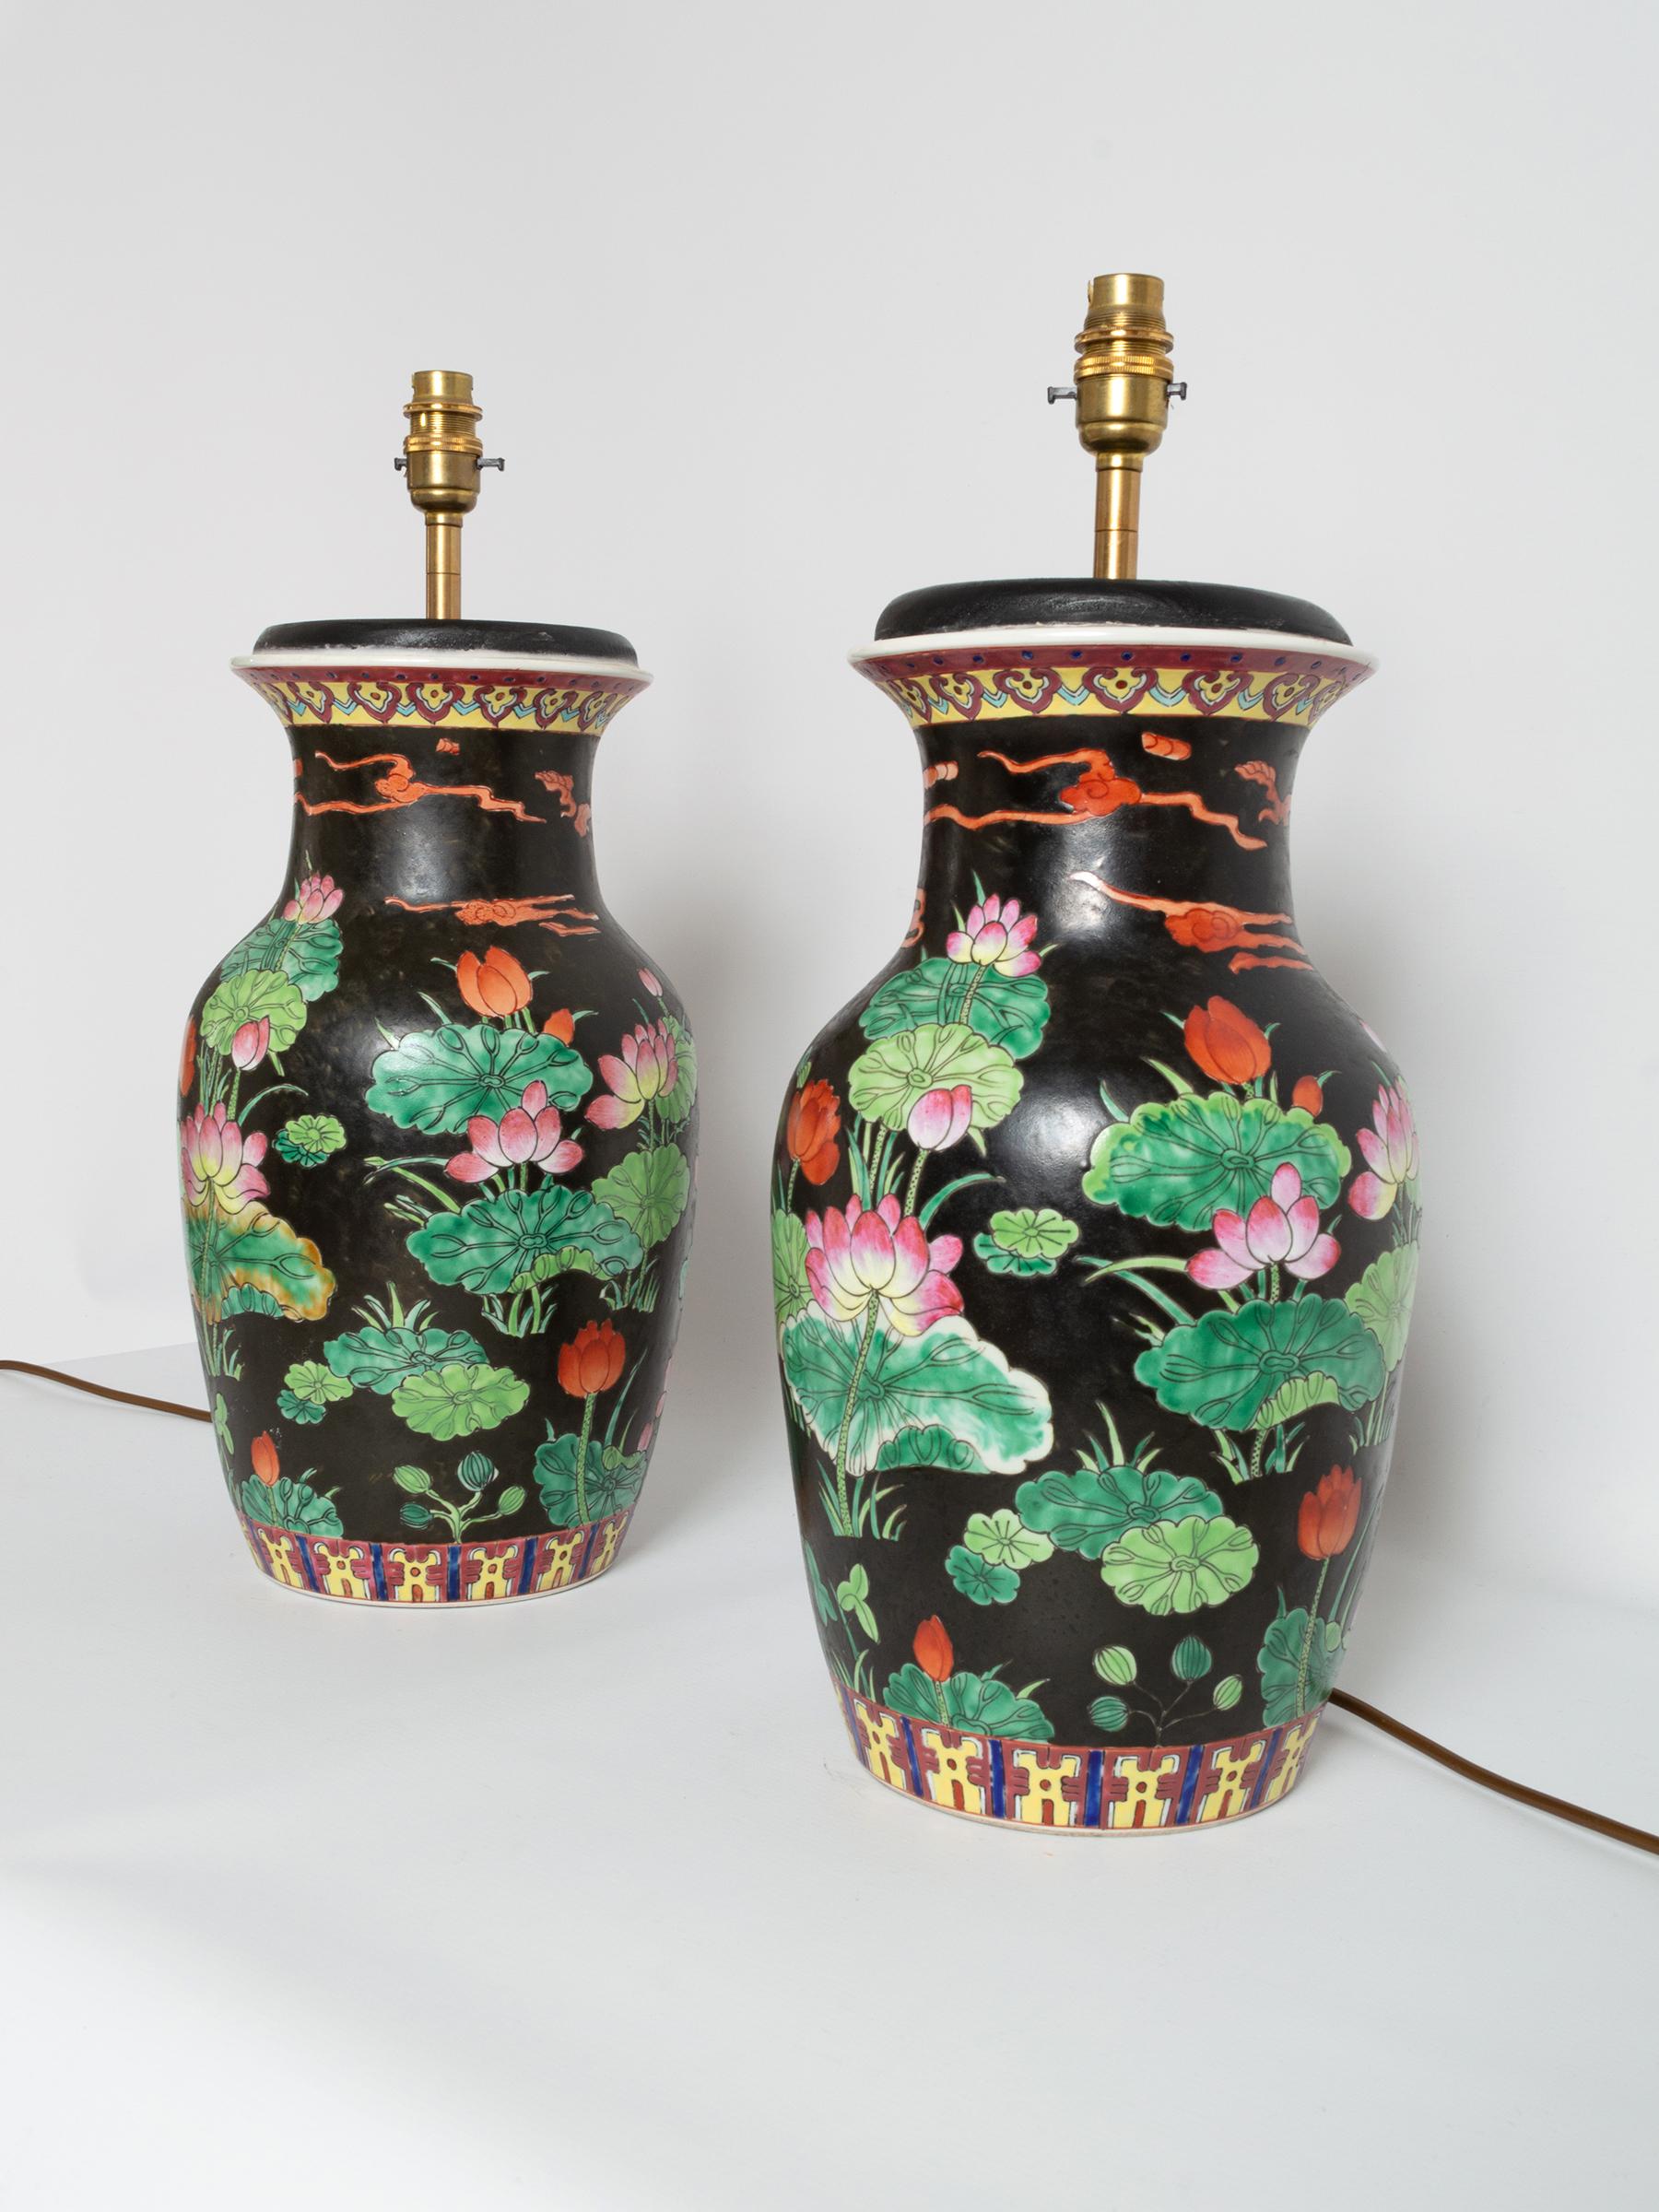 A pair of 19th century Chinese Famille Noire baluster vase lamps.
Beautifully hand painted.
In very good original condition. Wear consistent with age and use. Some loss to the glaze of one vase lamp.

Shades for illustrative purposes only.
  